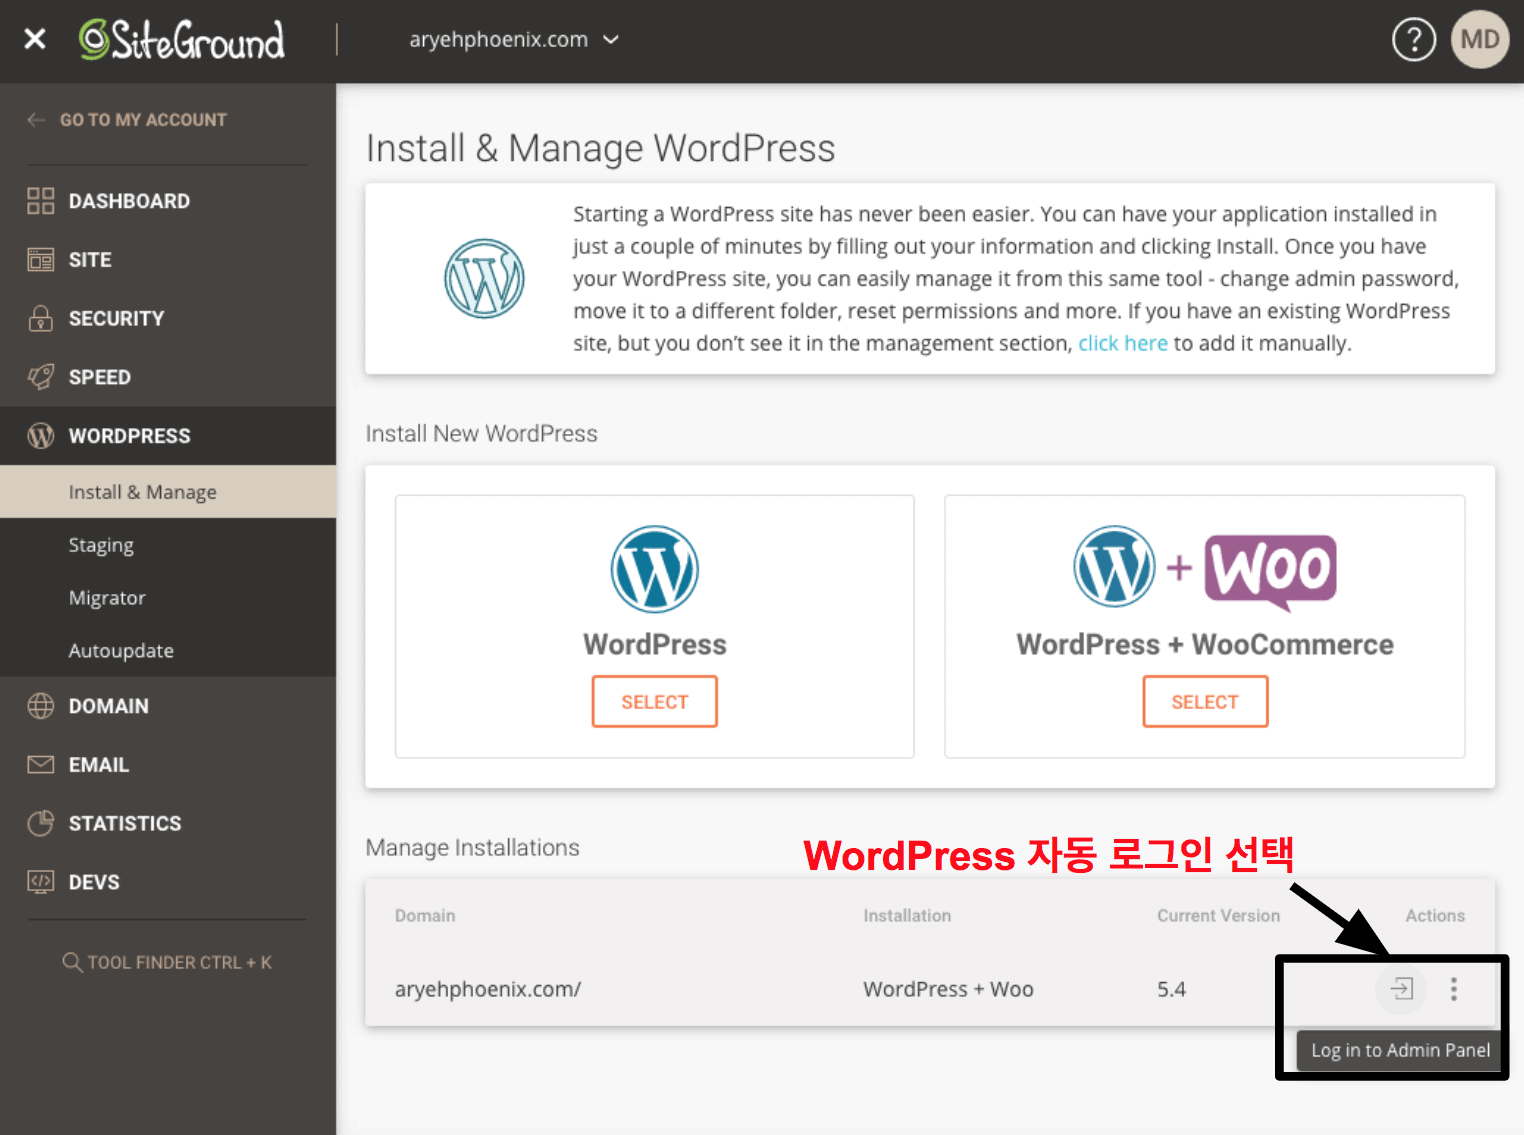 SiteGround offers a one click login option for your WordPress dashboard KO15